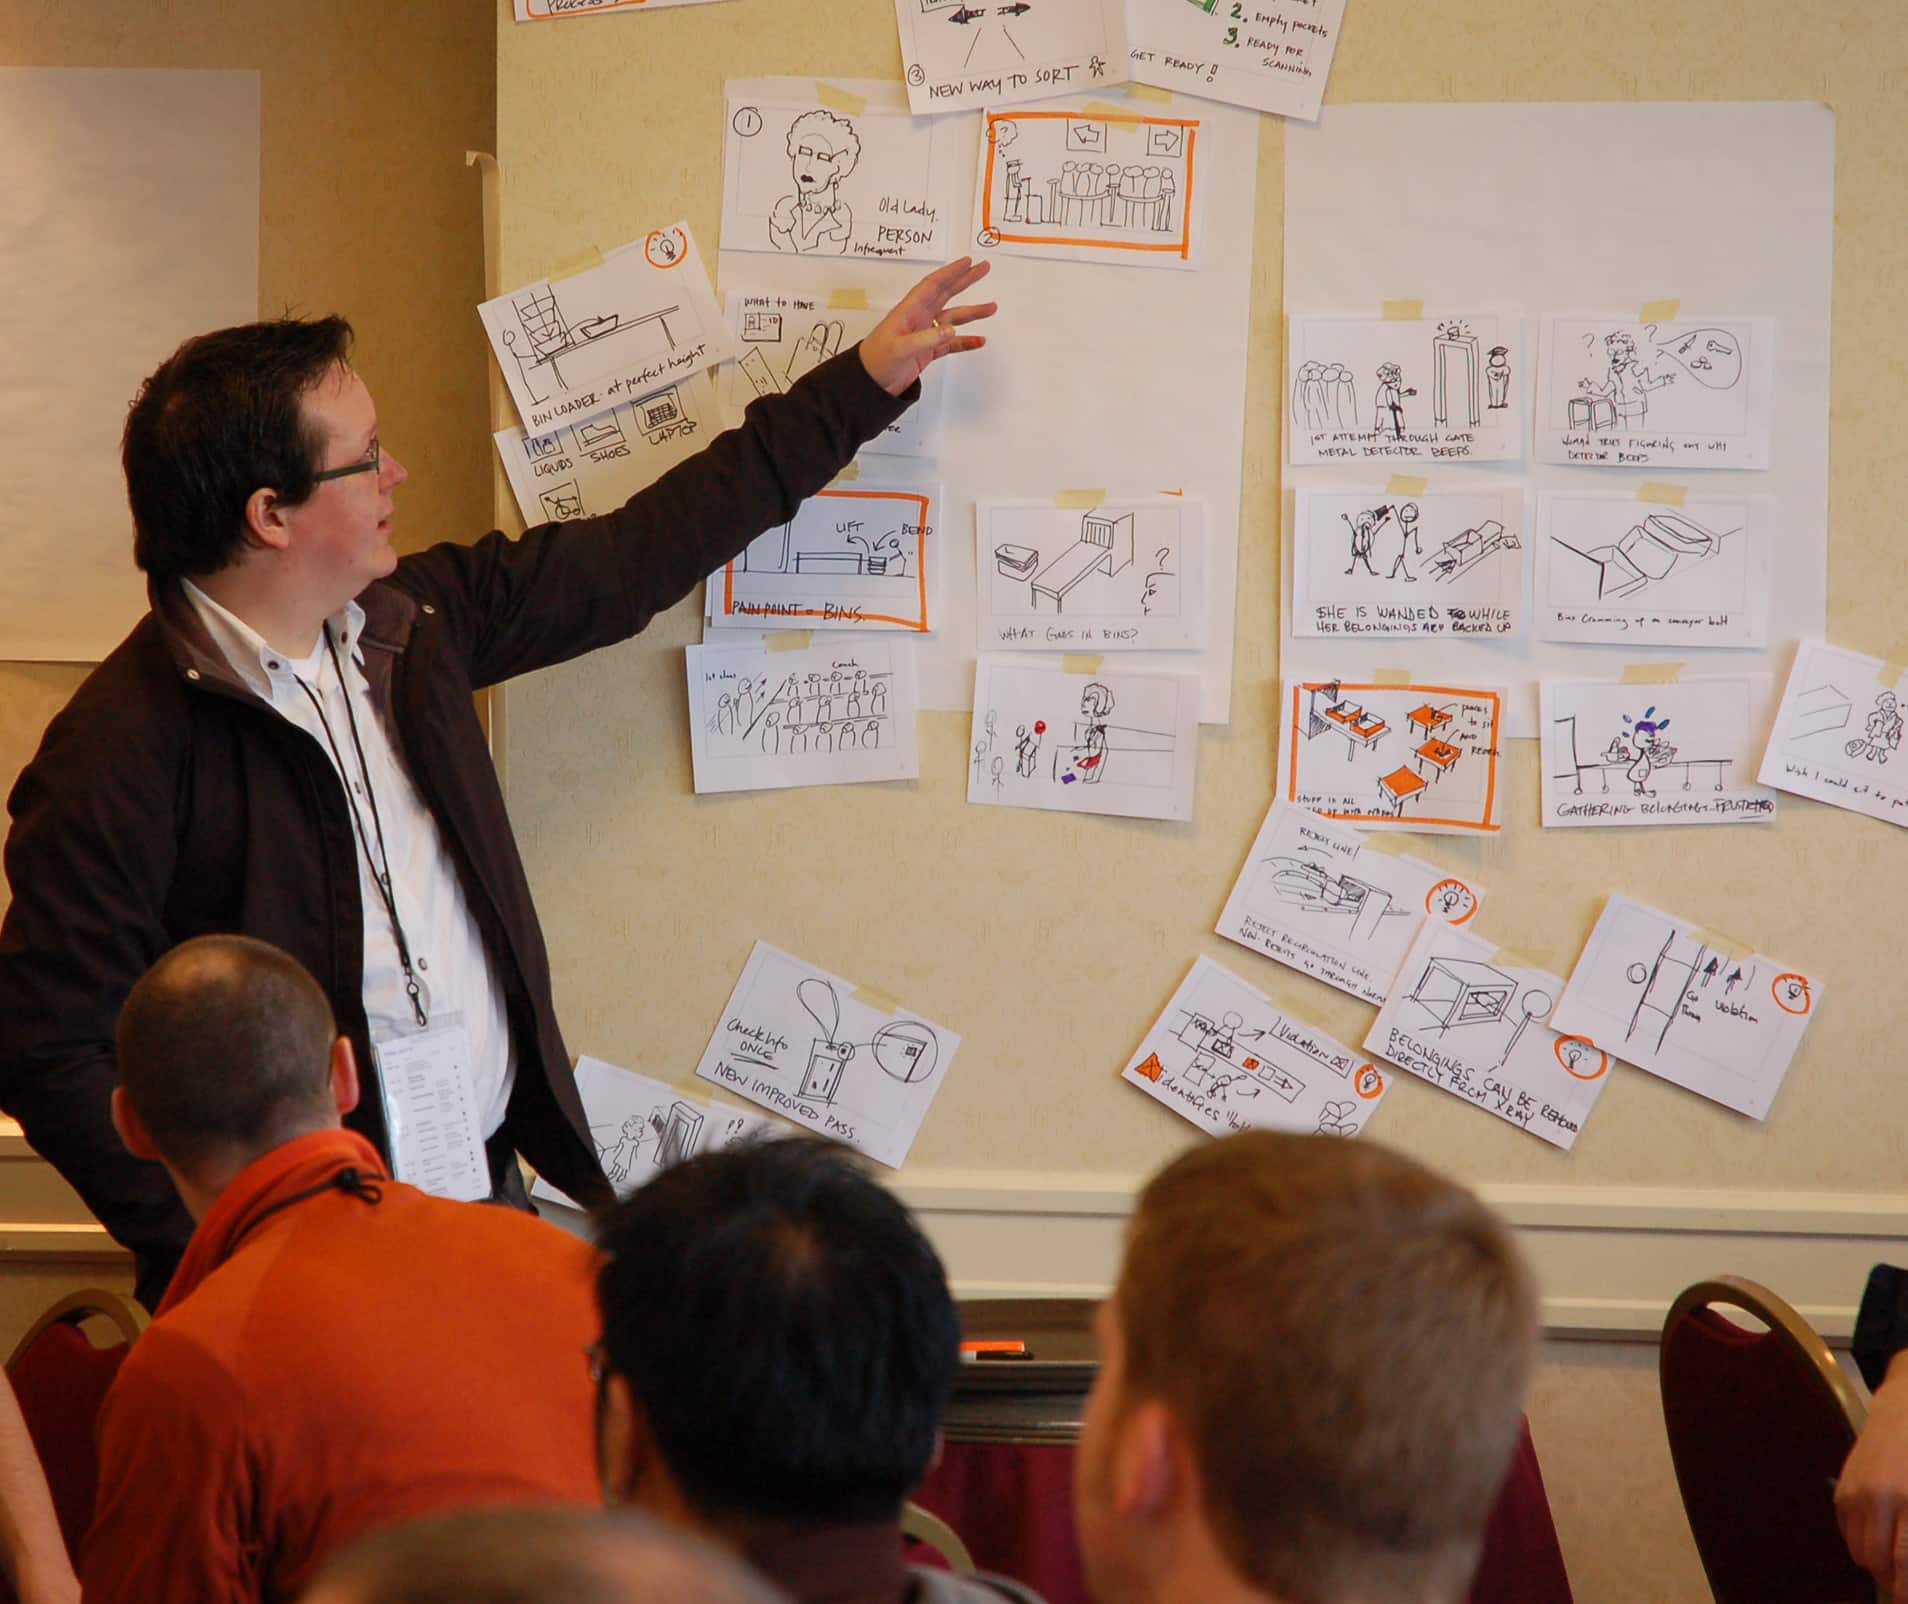 A designer presents work in front of a group.